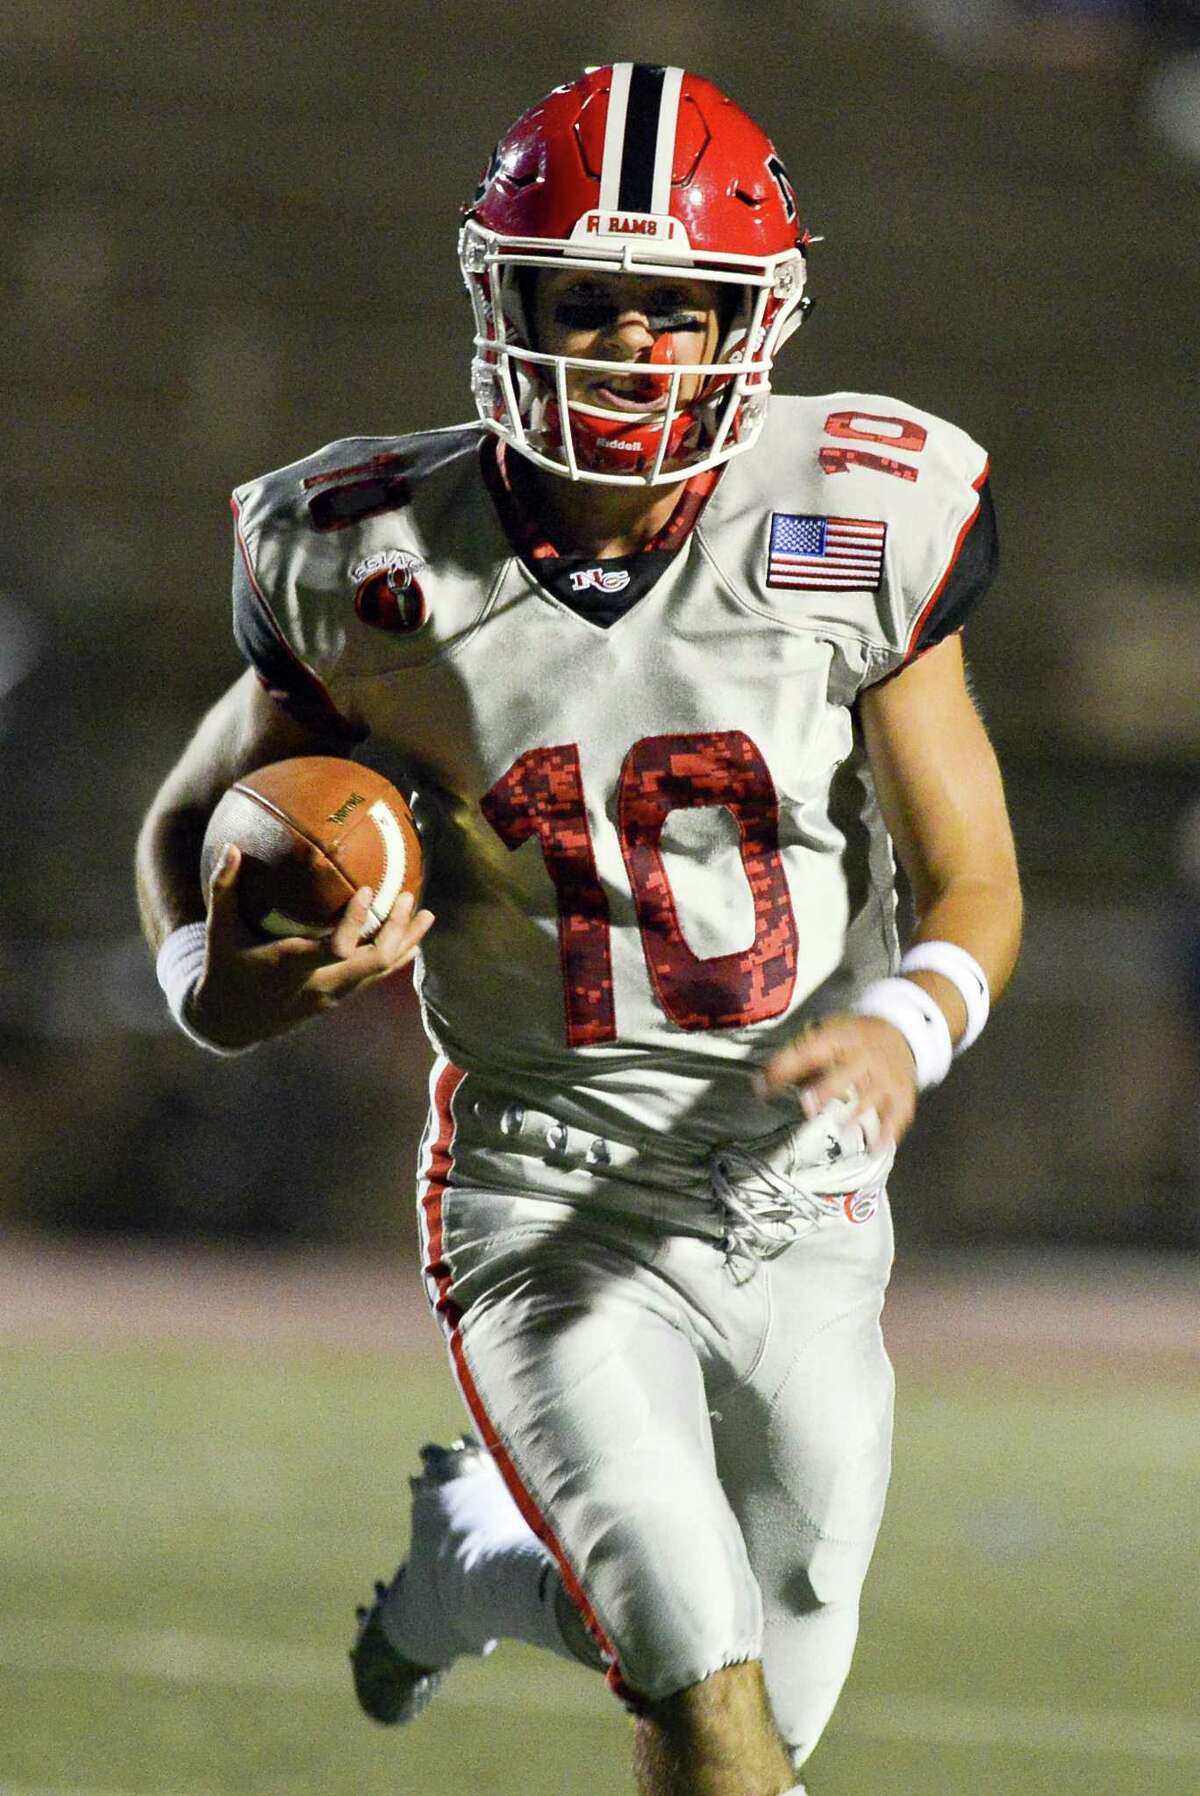 New Canaan quarterback Drew Pyne scrambles for a touchdown against Westhill on Sept. 28 at Boyle Stadium in Stamford.